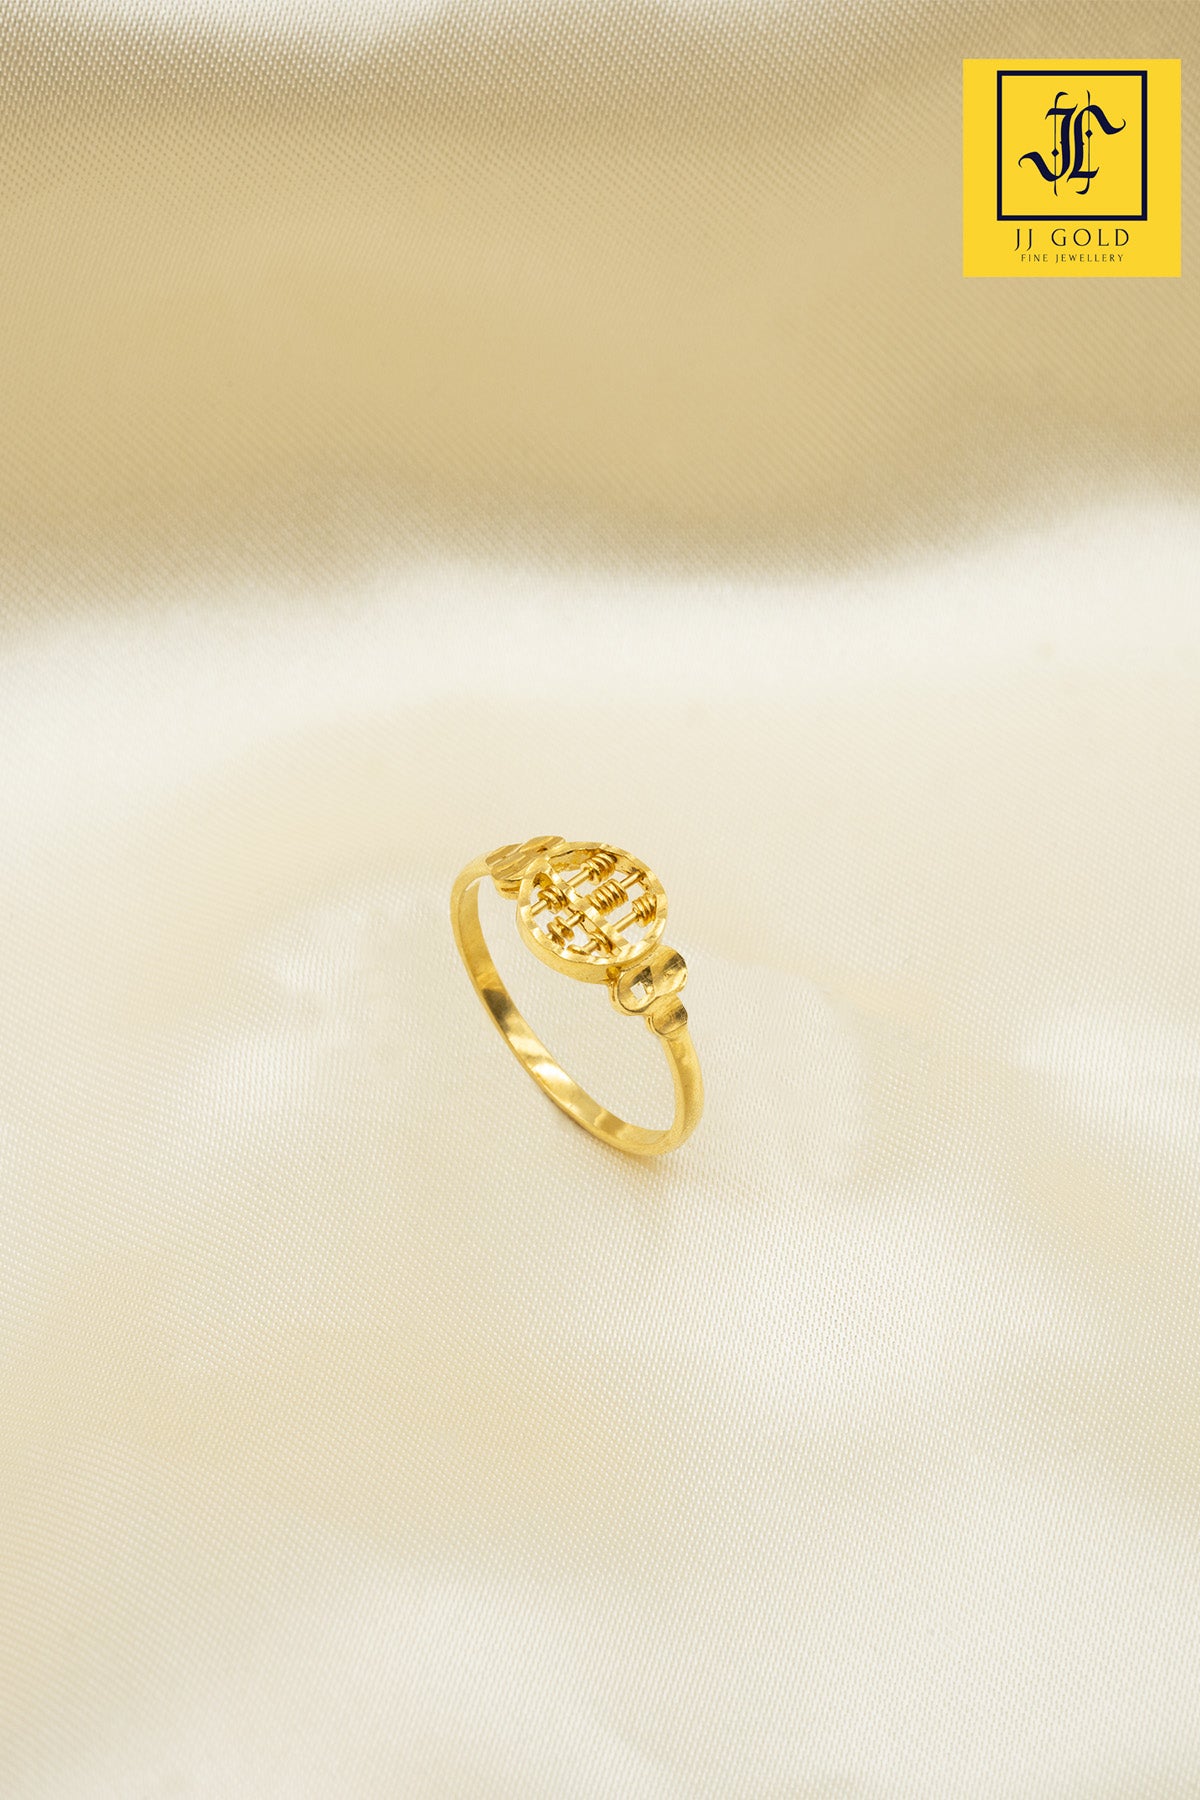 916 Gold Abacus Scape Ring